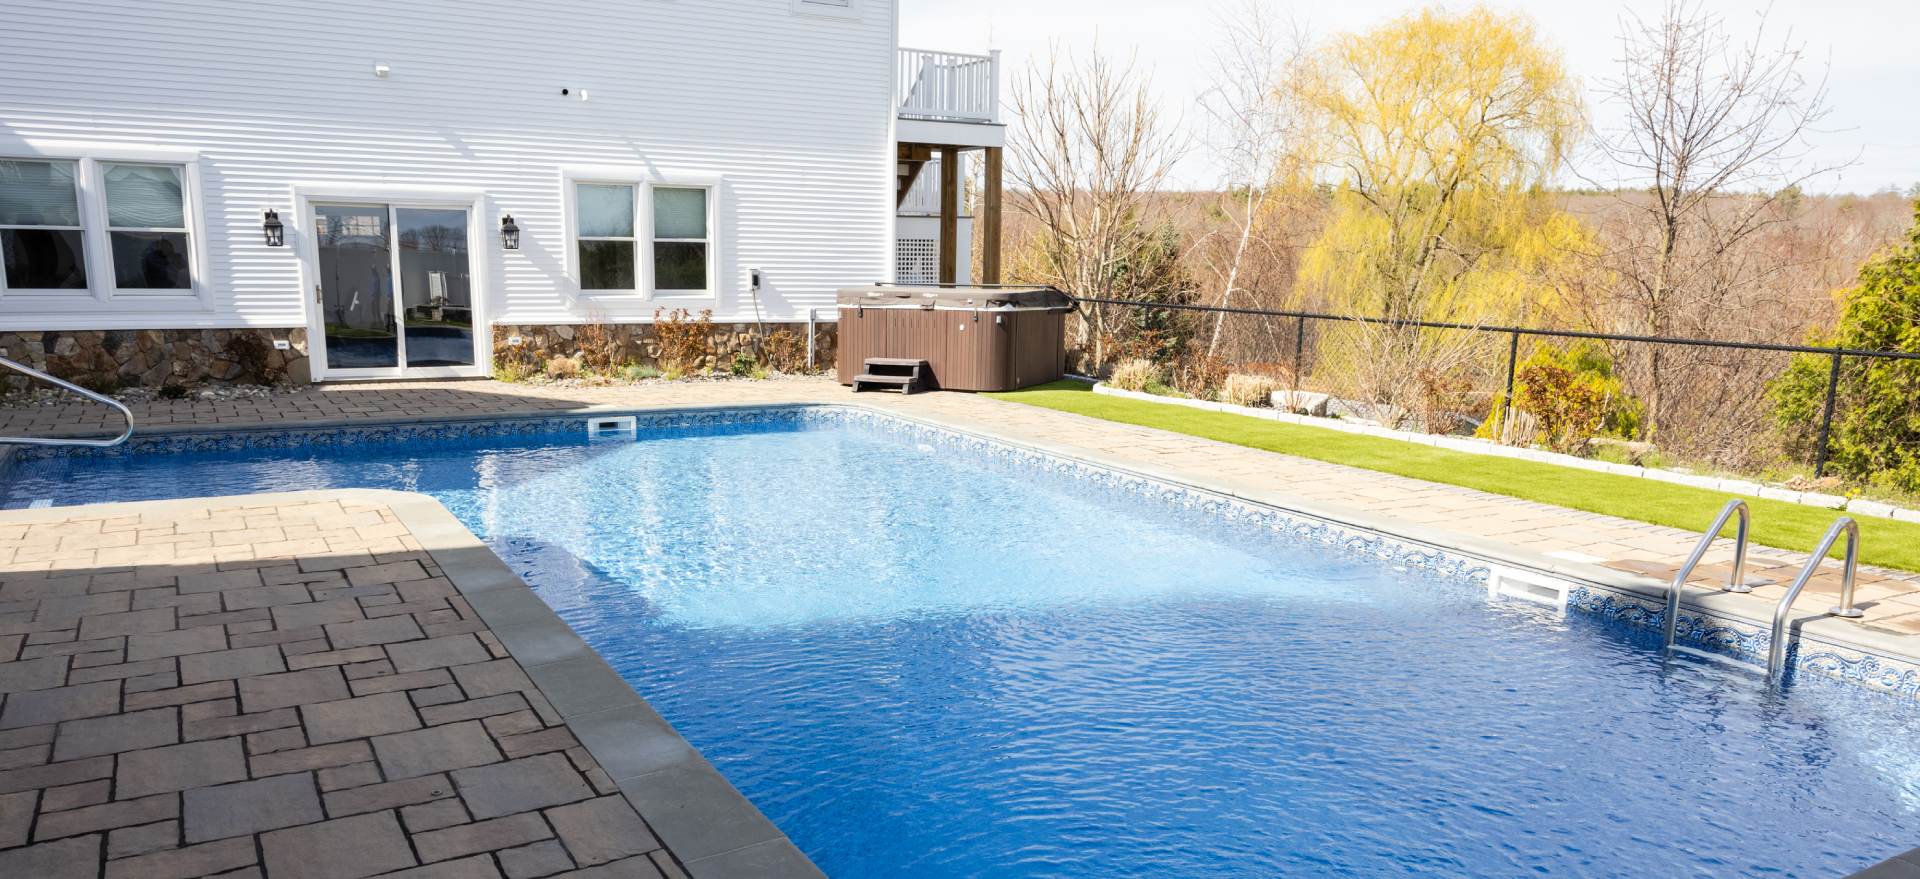 A pool with a hot tub in the back yard.